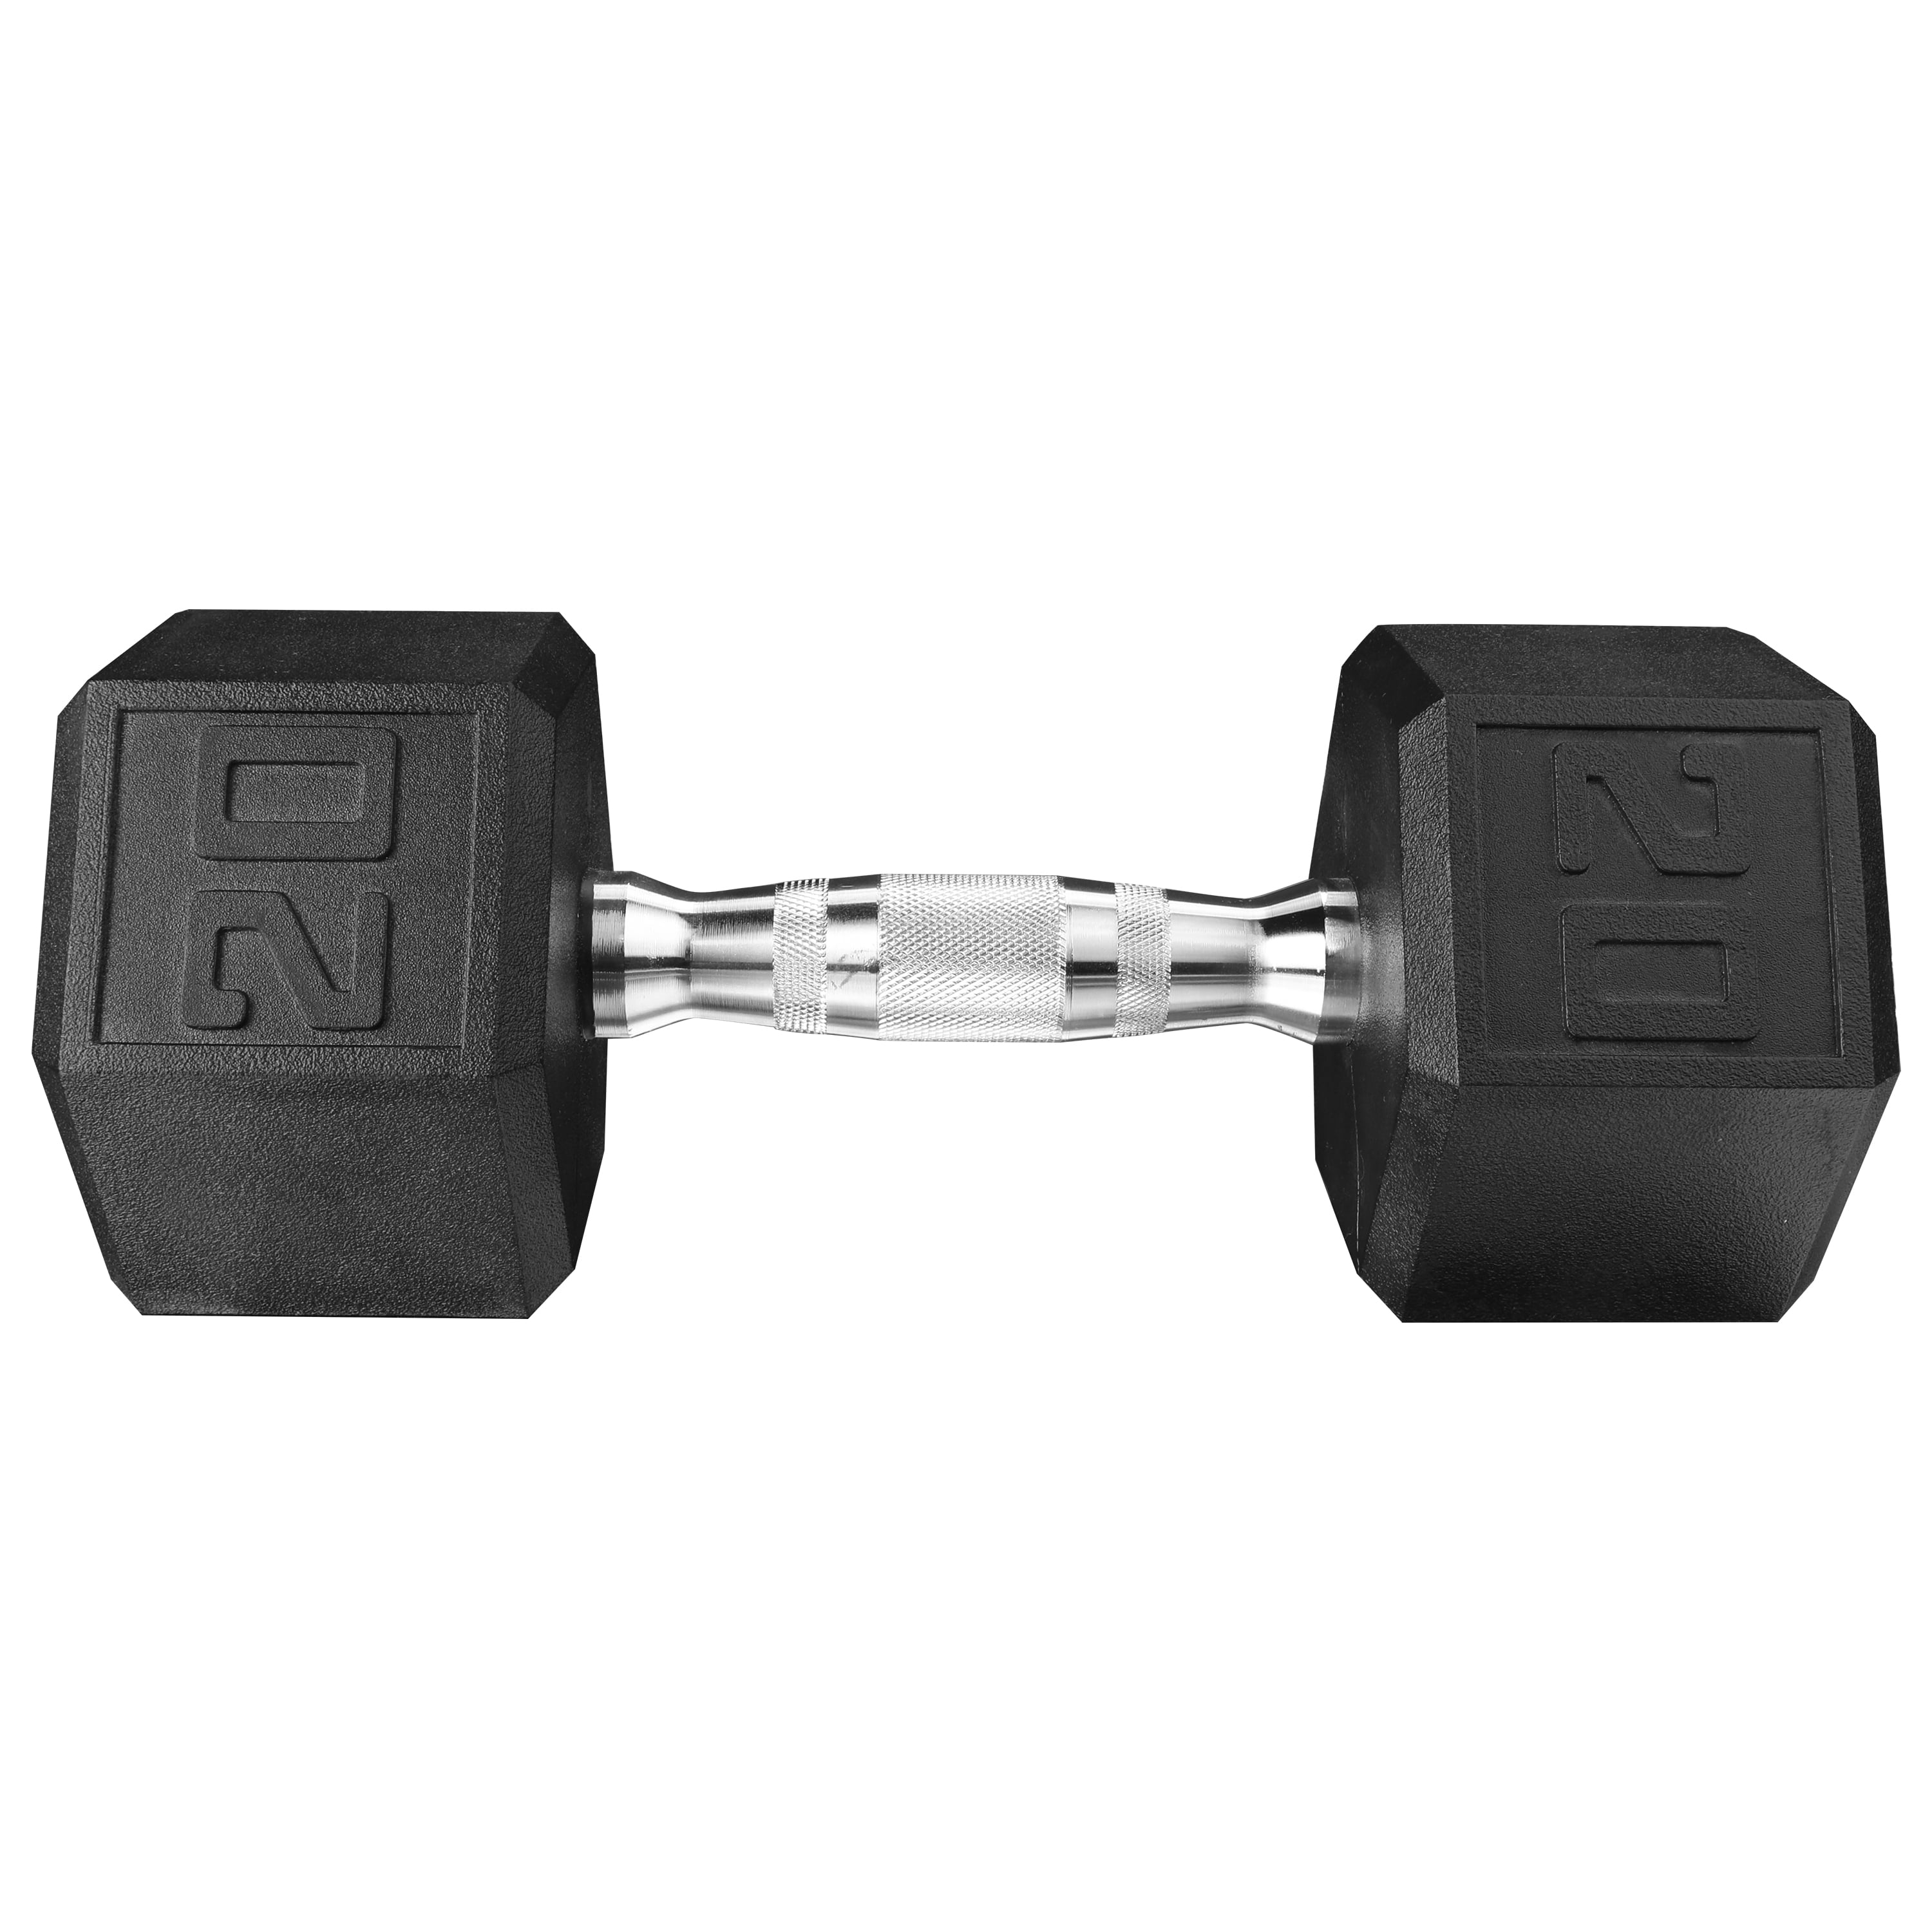 New 20lb Total FREE SHIPPING! 10lb Pair Weider Rubber Hex Dumbbells 